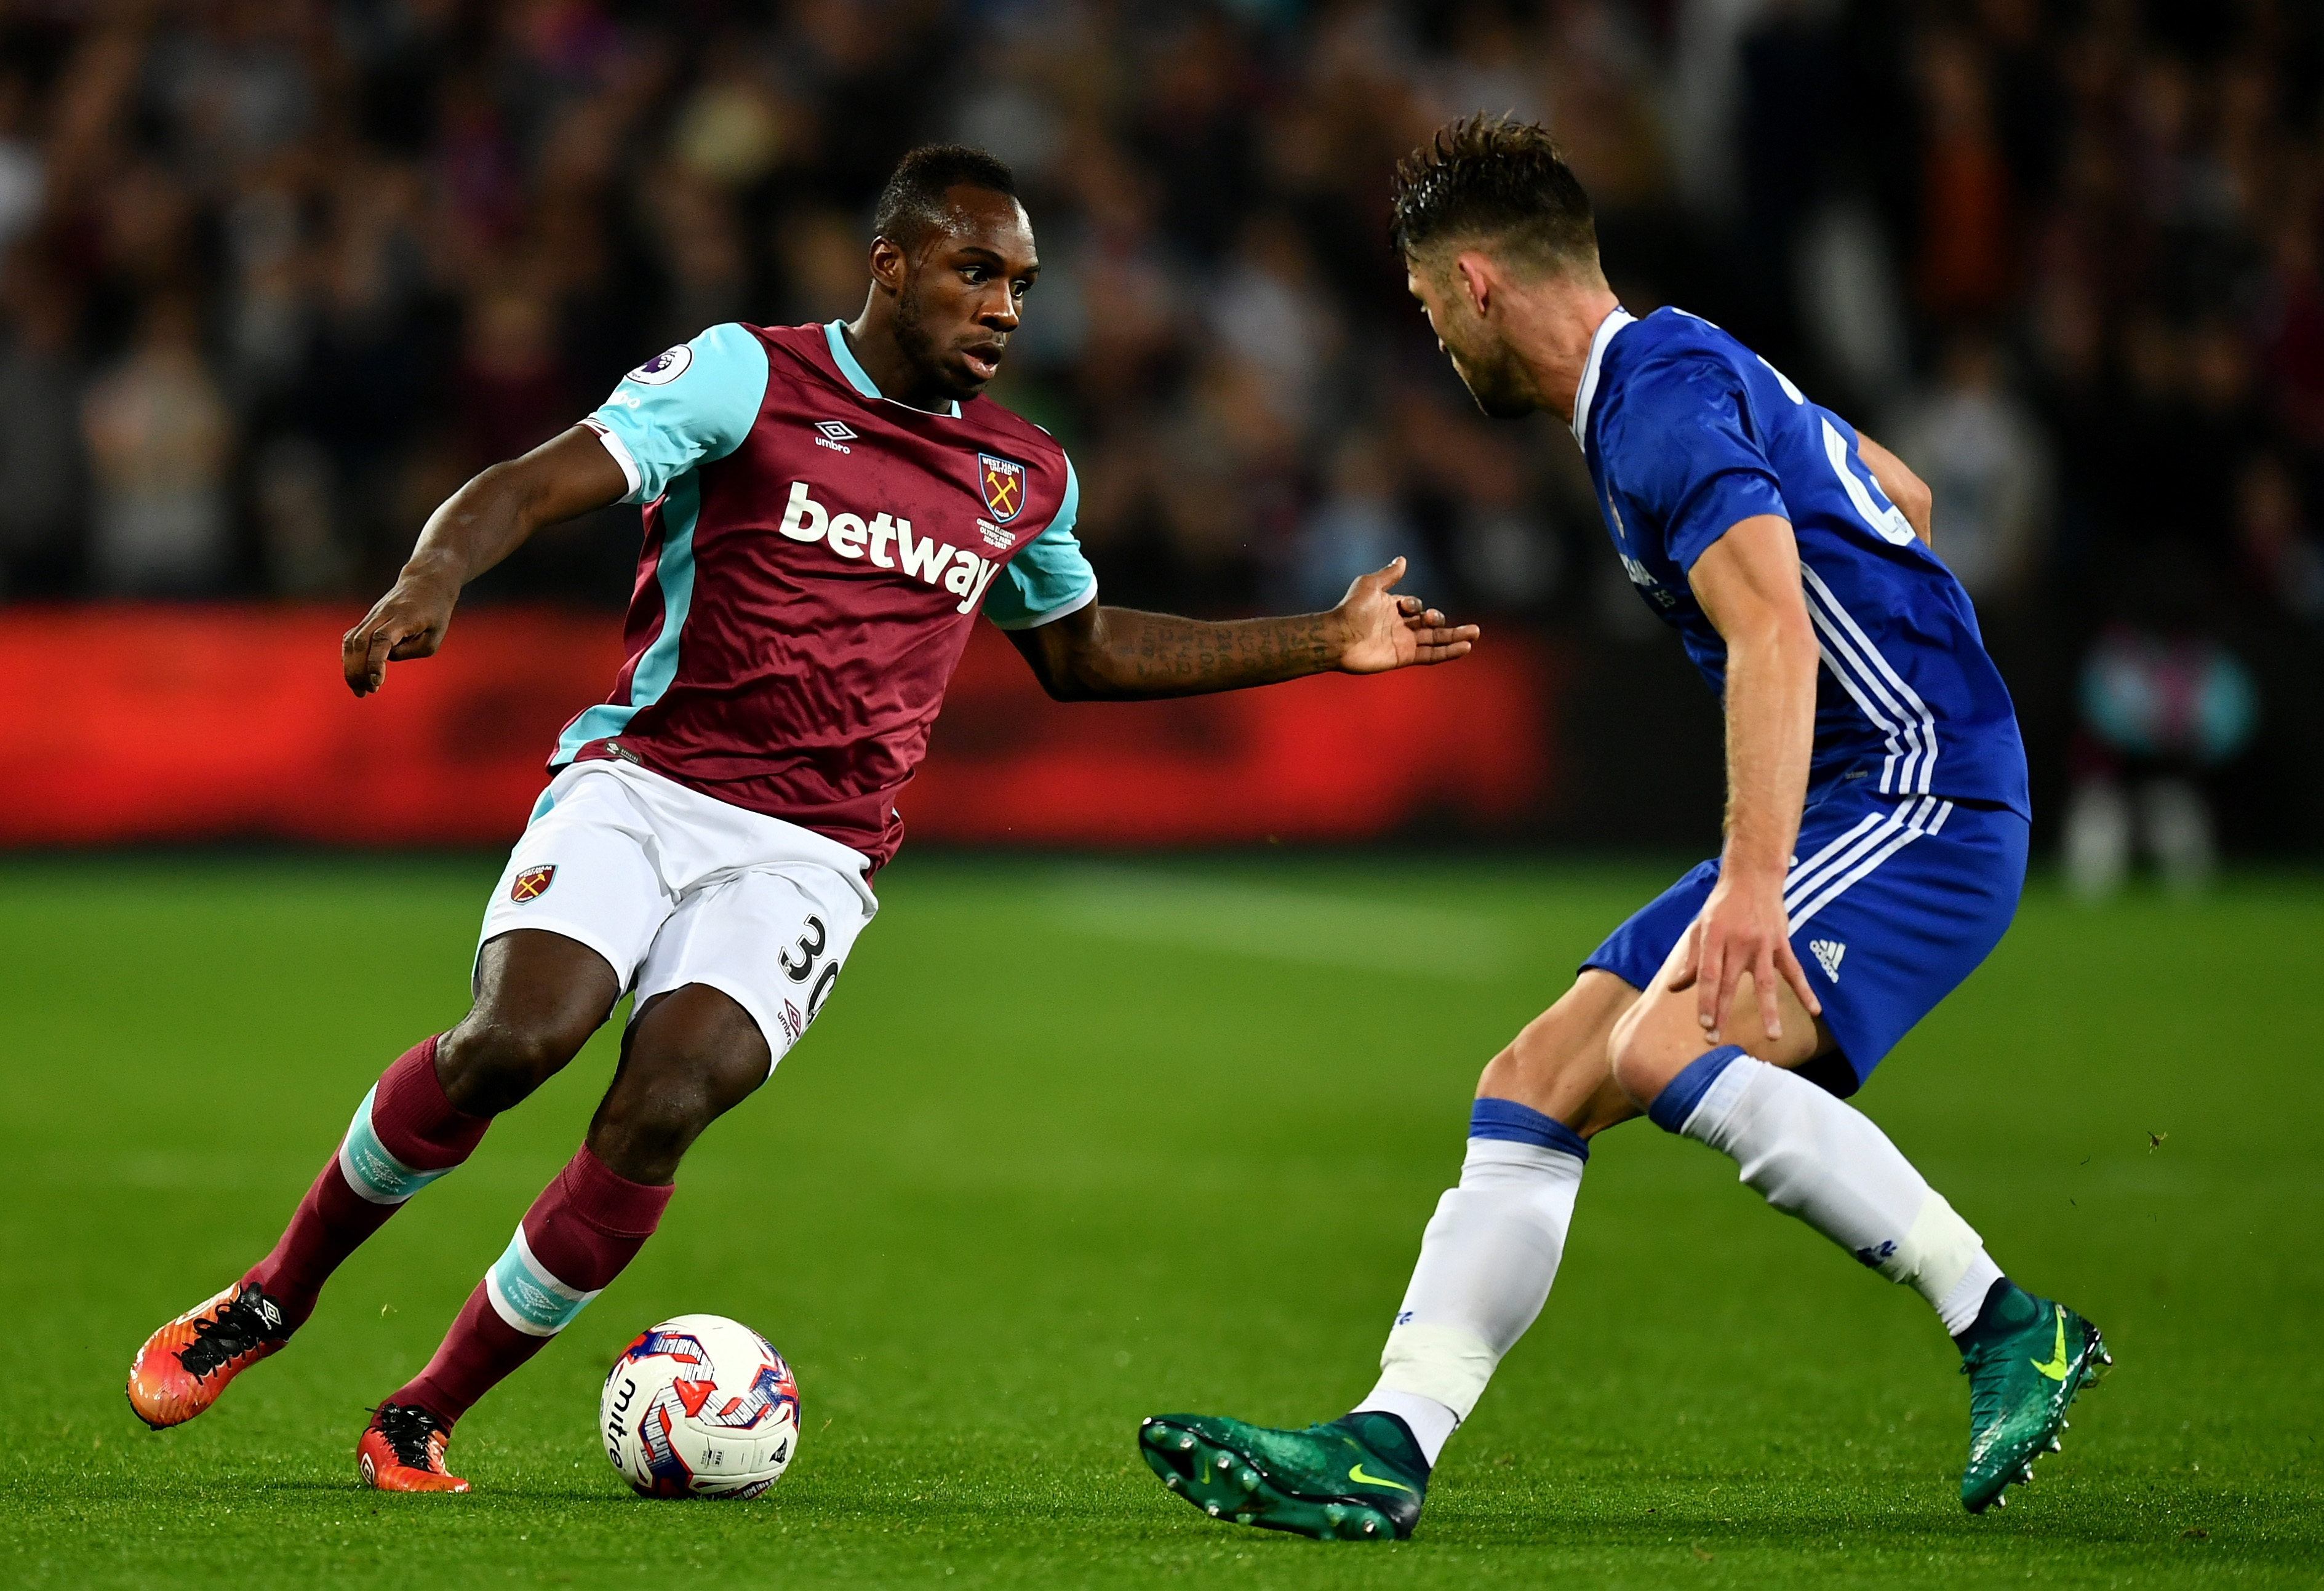 LONDON, ENGLAND - OCTOBER 26: Michail Antonio of West Ham United (L) takes the ball past Gary Cahill of Chelsea (R) during the EFL Cup fourth round match between West Ham United and Chelsea at The London Stadium on October 26, 2016 in London, England.  (Photo by Dan Mullan/Getty Images)